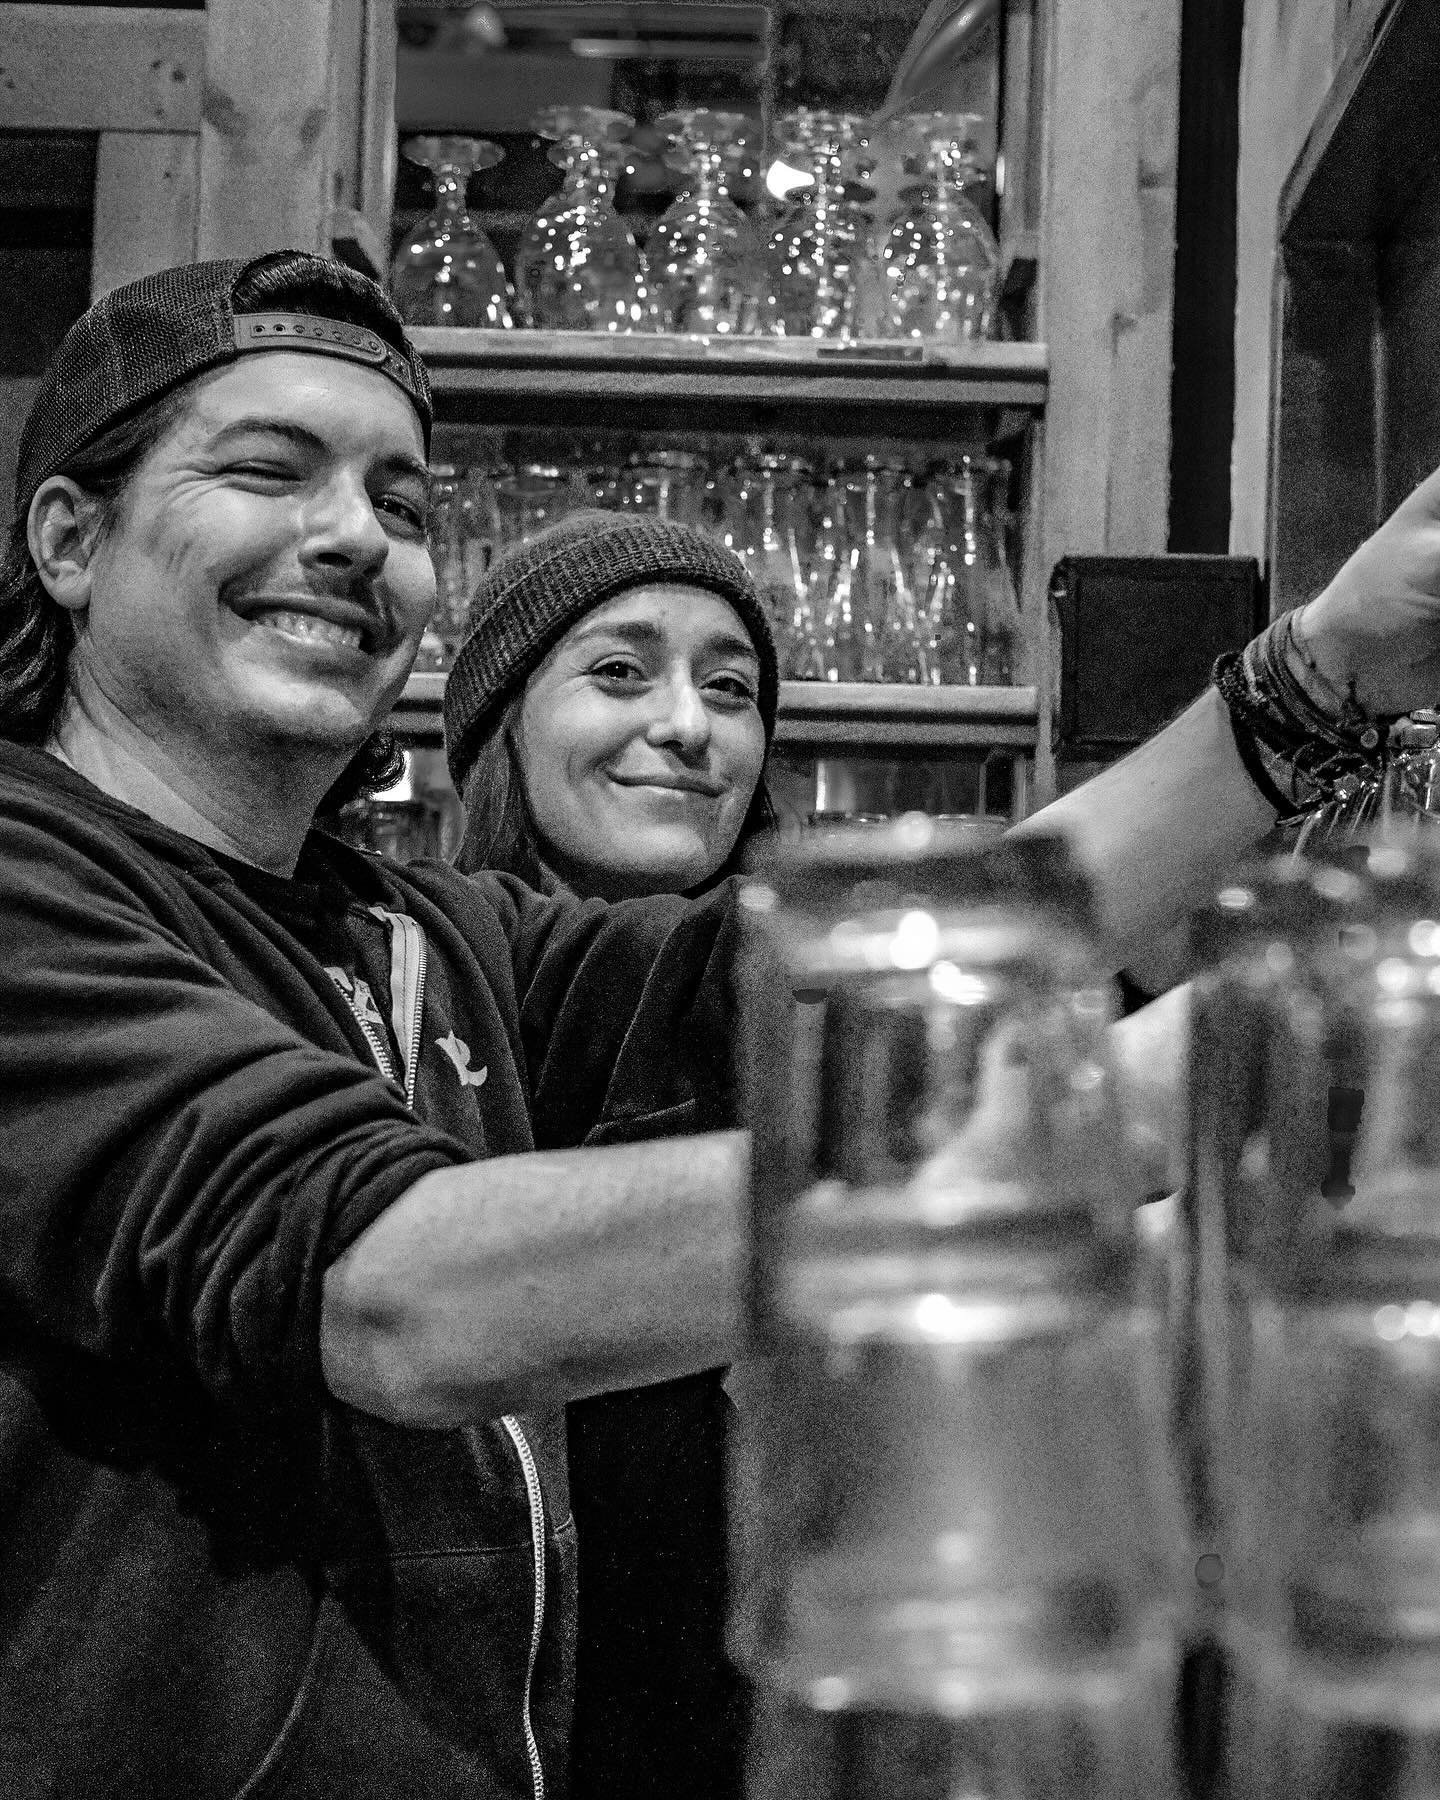 Call us biased but we have some of the best staff members ever! Cheers to Monday and hope to see you all this week!
.
.
.
#hamtownsfinest #thelastbestbrew #supportlocal #drinklocalbeer #comeondown #happycampers